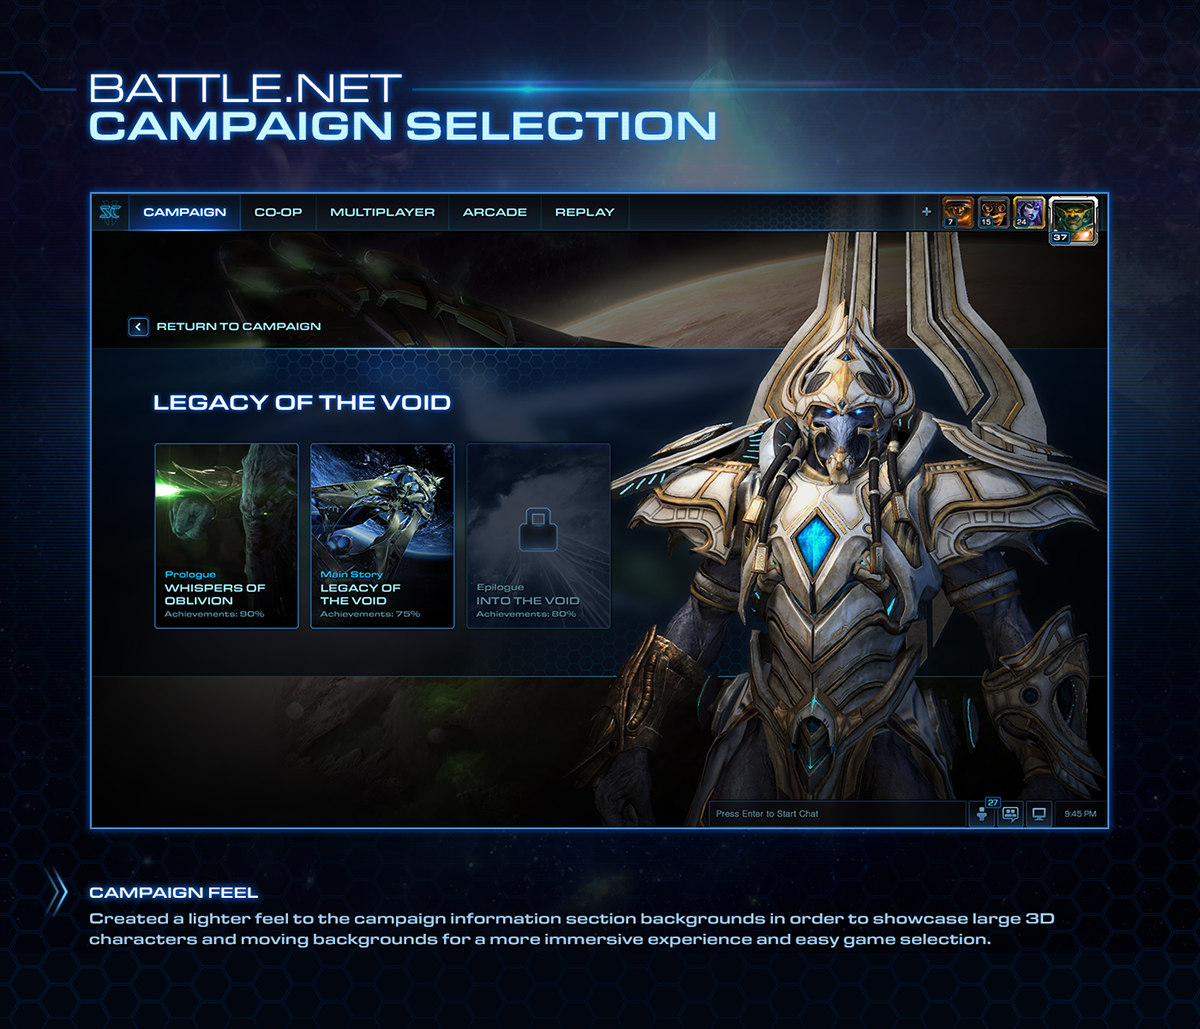 STARCRAFT 2 Legacy of the Void обложка. Диск старкрафт 2 Legacy of the Void. STARCRAFT 2 Legacy of the Void источники миазмов. STARCRAFT II (2): Legacy of the Void.